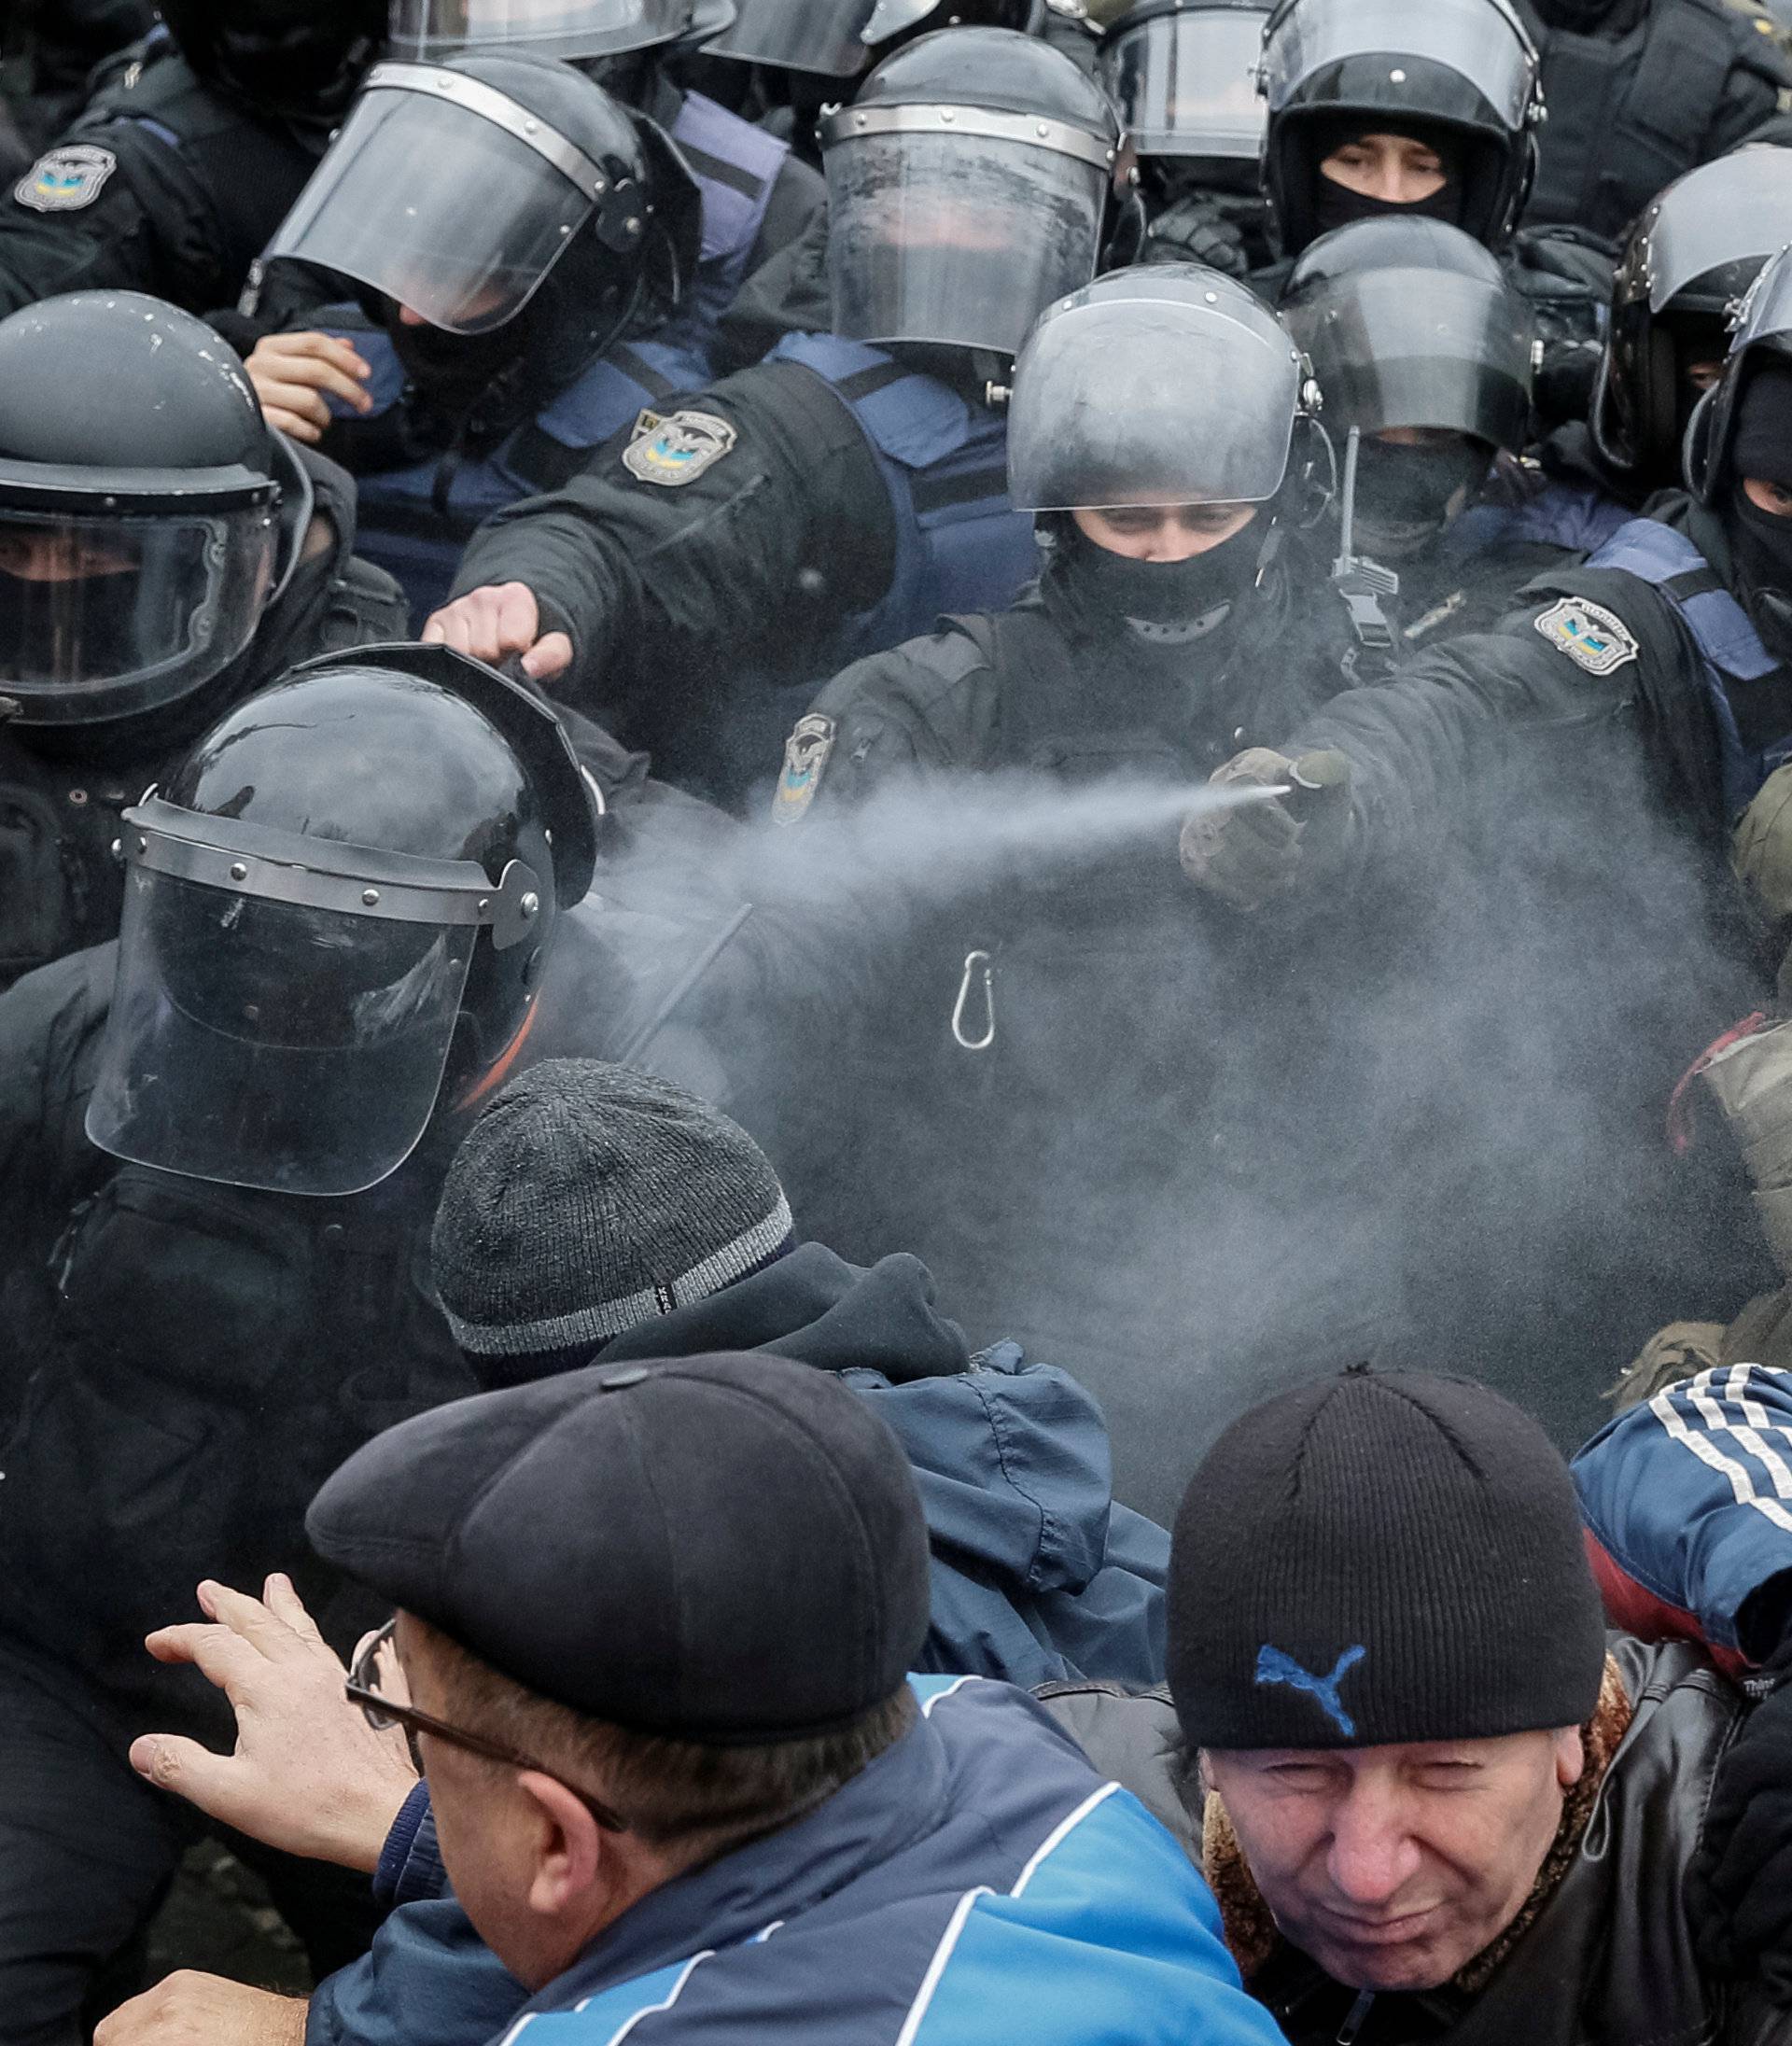 Police officers use tear gas against supporters of former Georgian President Saakashvili during clashes in Kiev